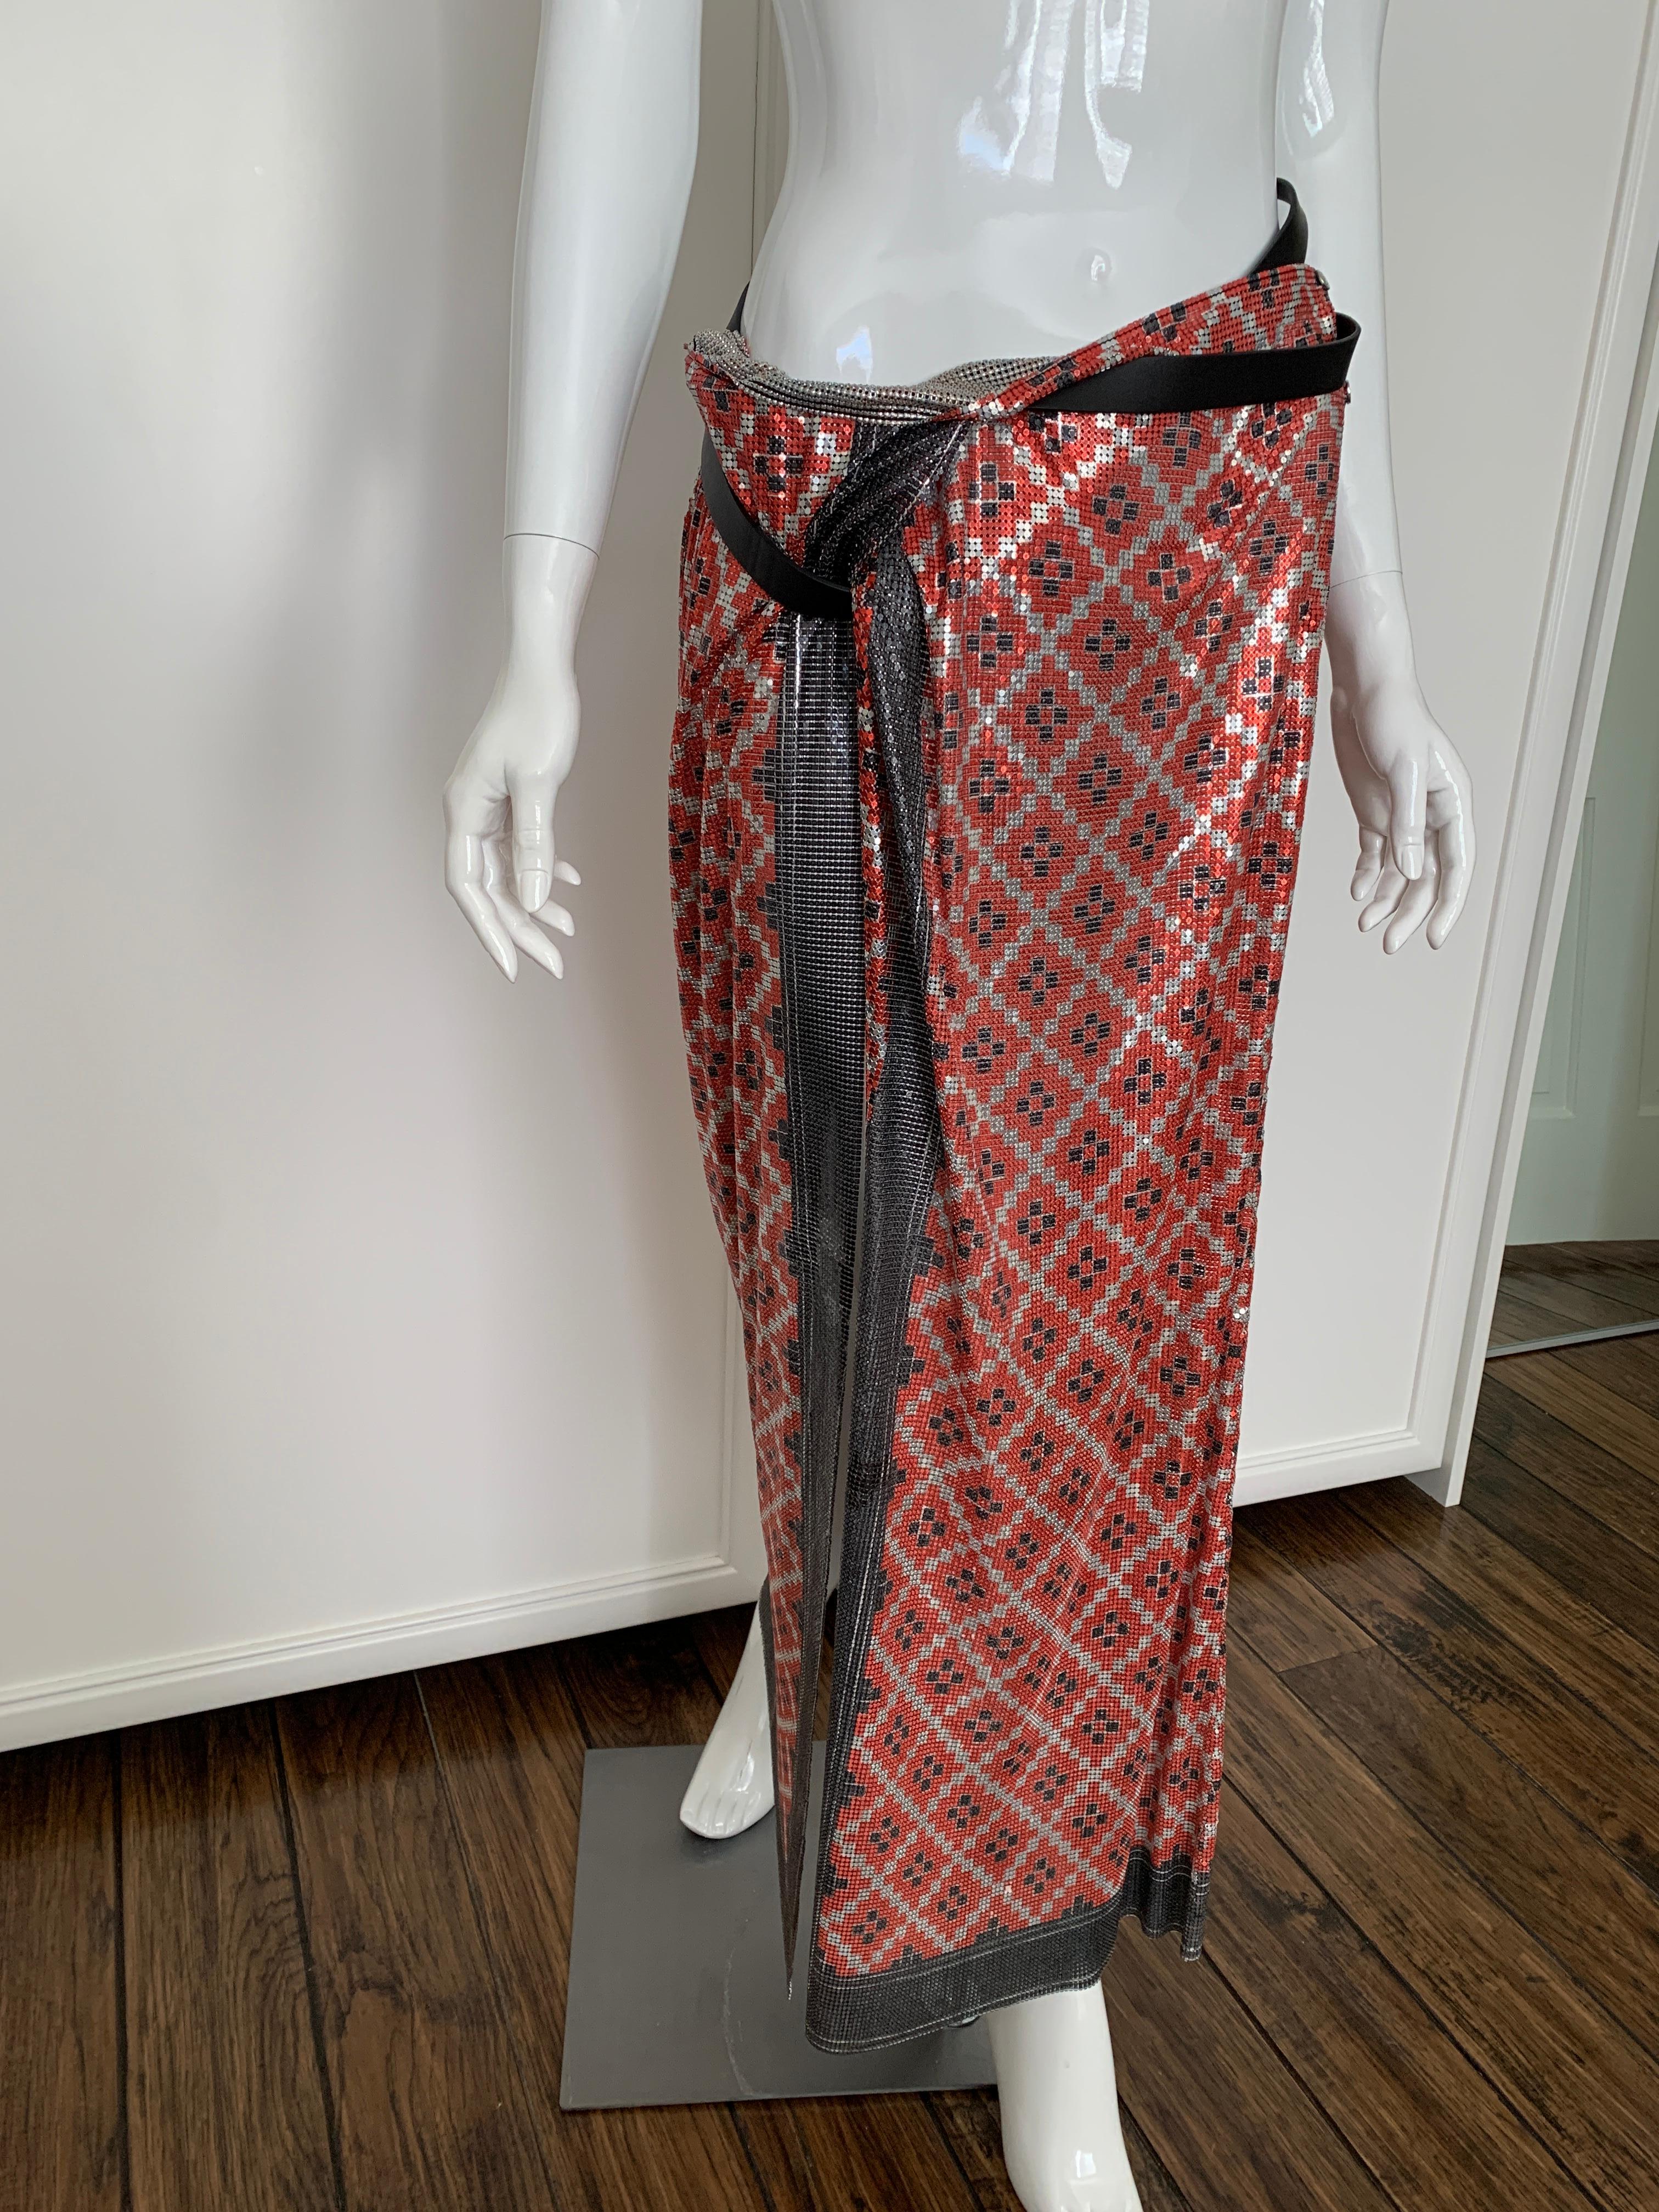 This skirt is a piece of art. Wrap in style, long in length, with slit opening. The belt is brown leather. with a silver ring and can be wrapped and adjusted for one's interpretation of styling the skirt. 

The skirt is red, black, and silver on the